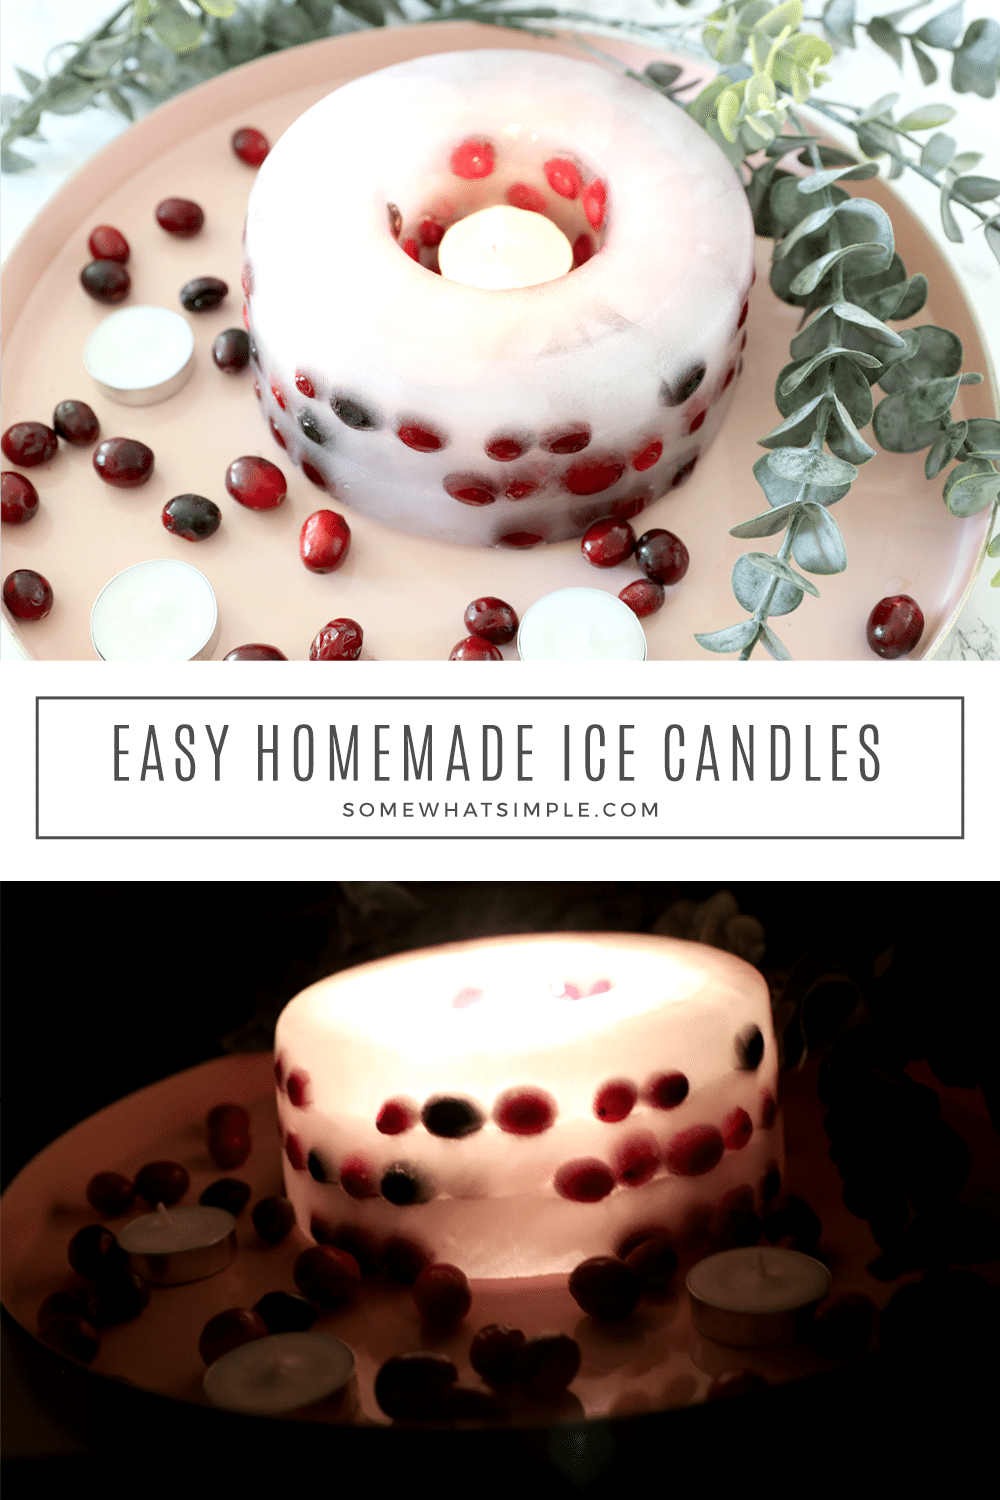 These ice candles will transform your walkway into a winter wonderland! via @somewhatsimple